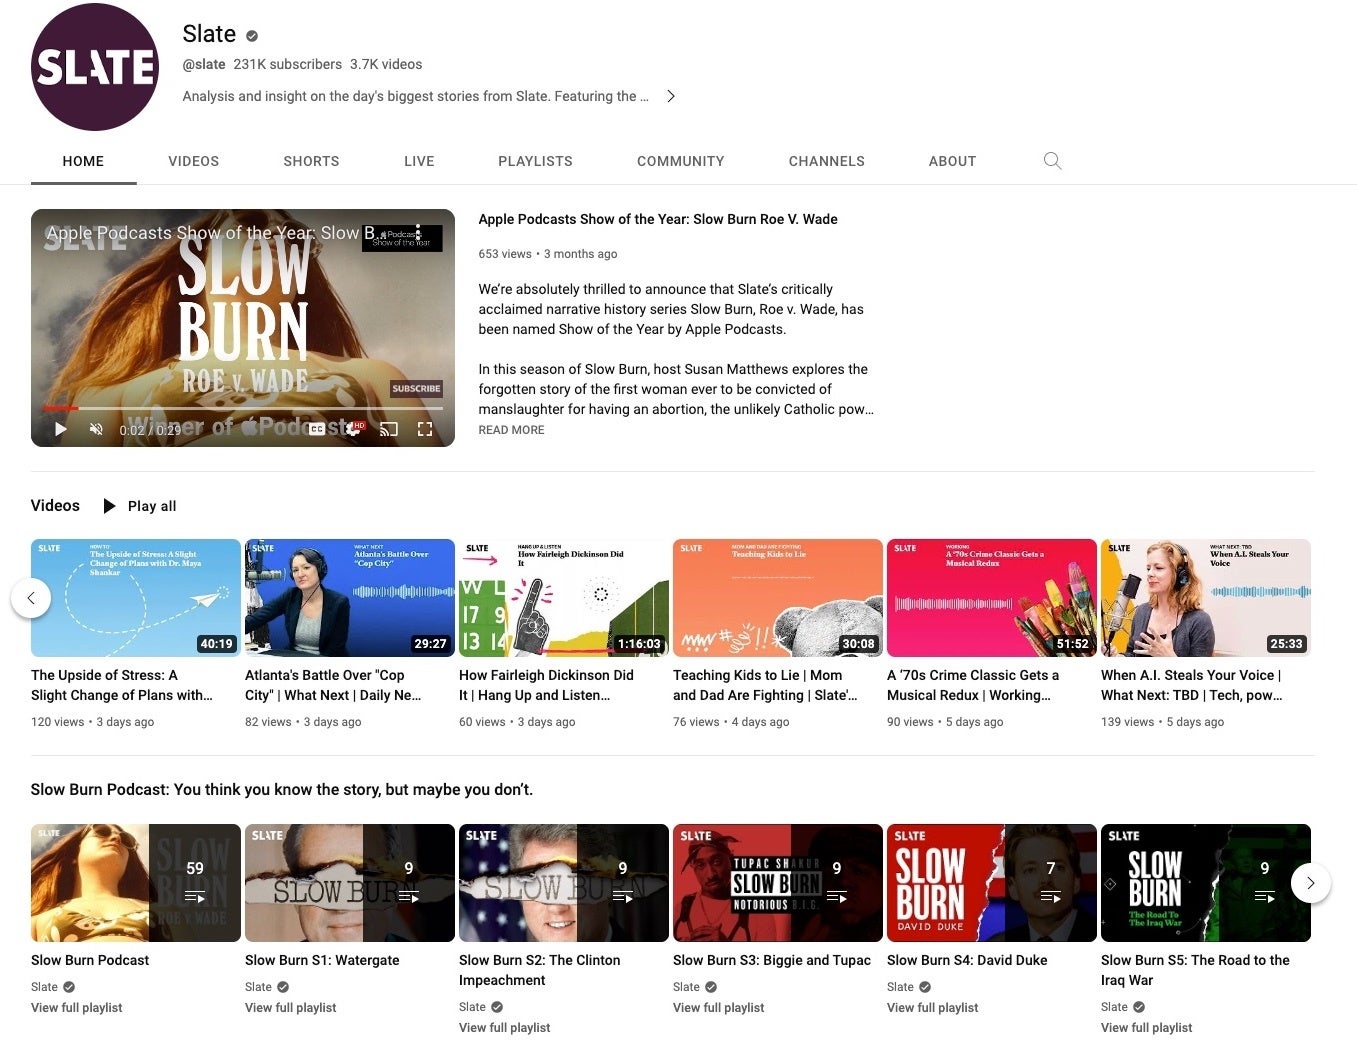 A screenshot of the Slate YouTube Channel showing thumbnail images from different podcast episodes like Slow Burn, What Next, How To, and Hang Up and Listen.